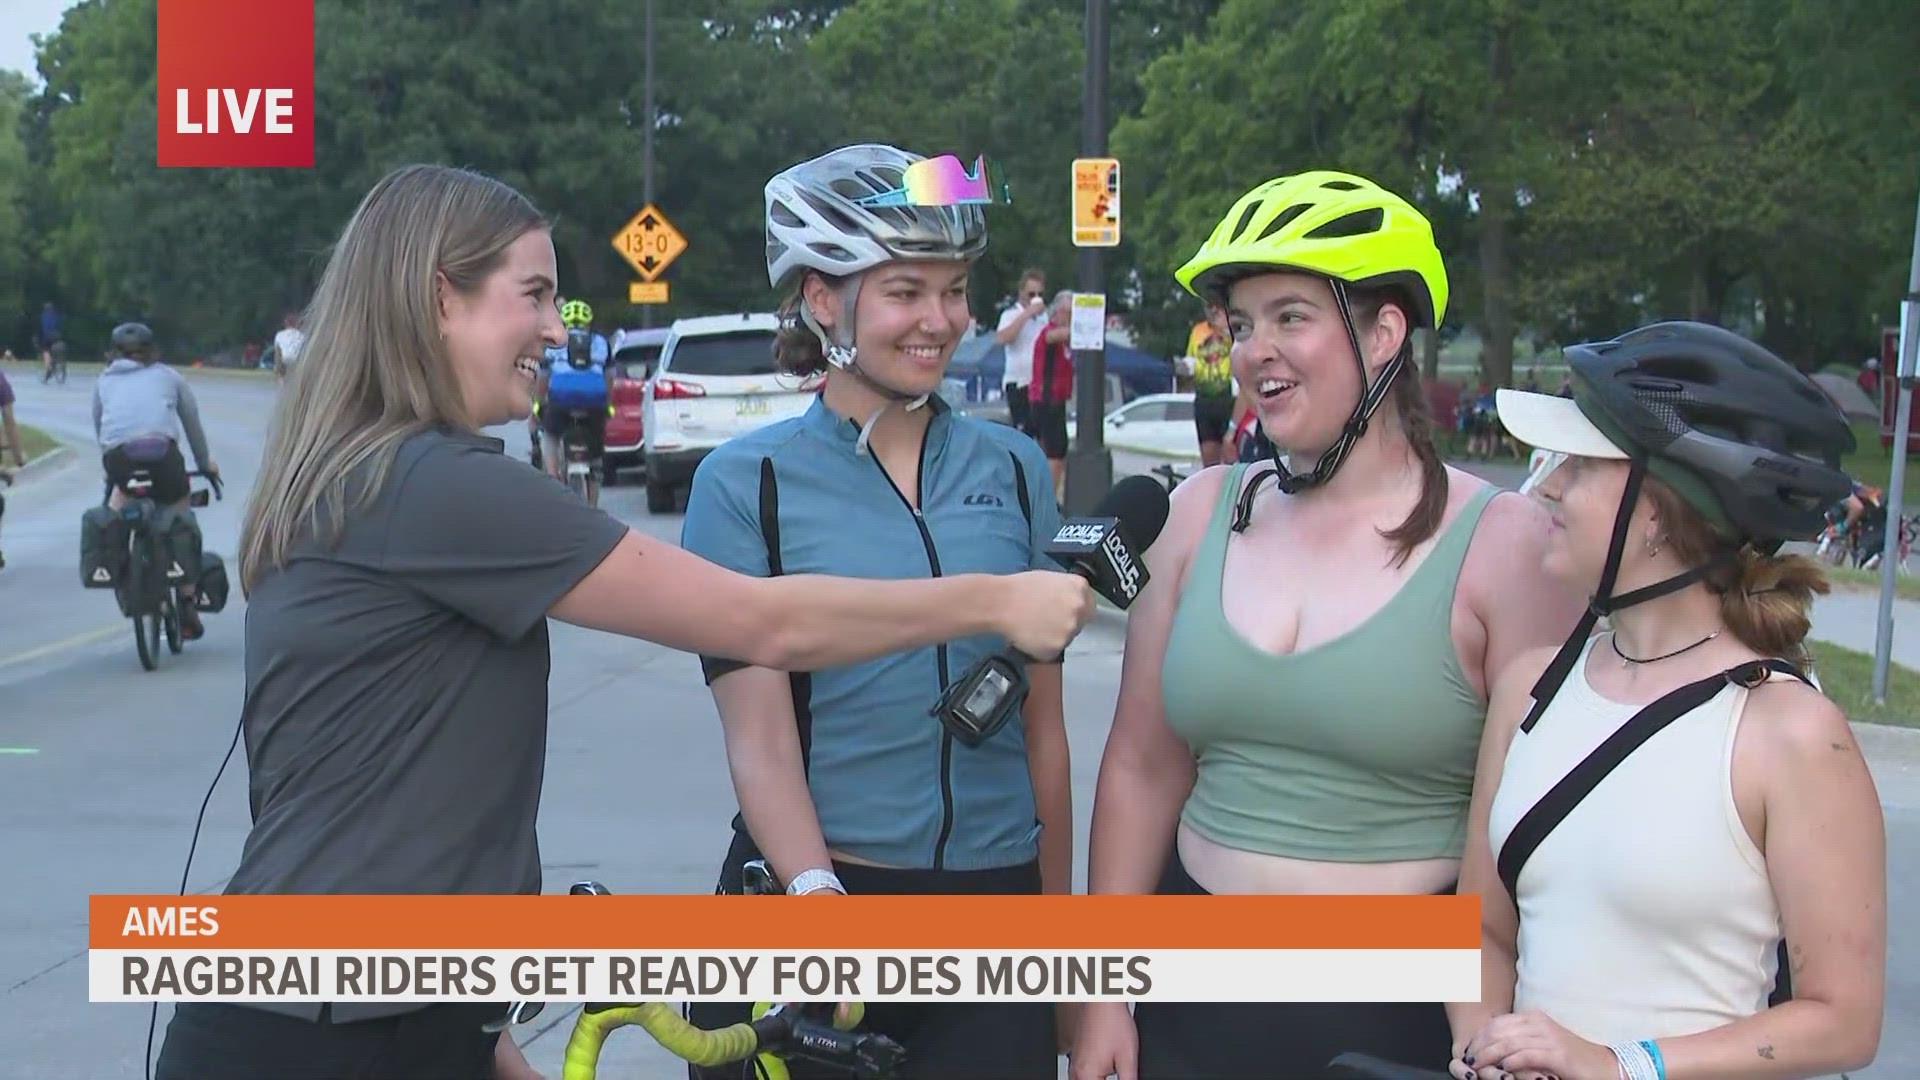 Local 5's Meghan Macpherson talks to cyclists before they begin their ride to Des Moines.